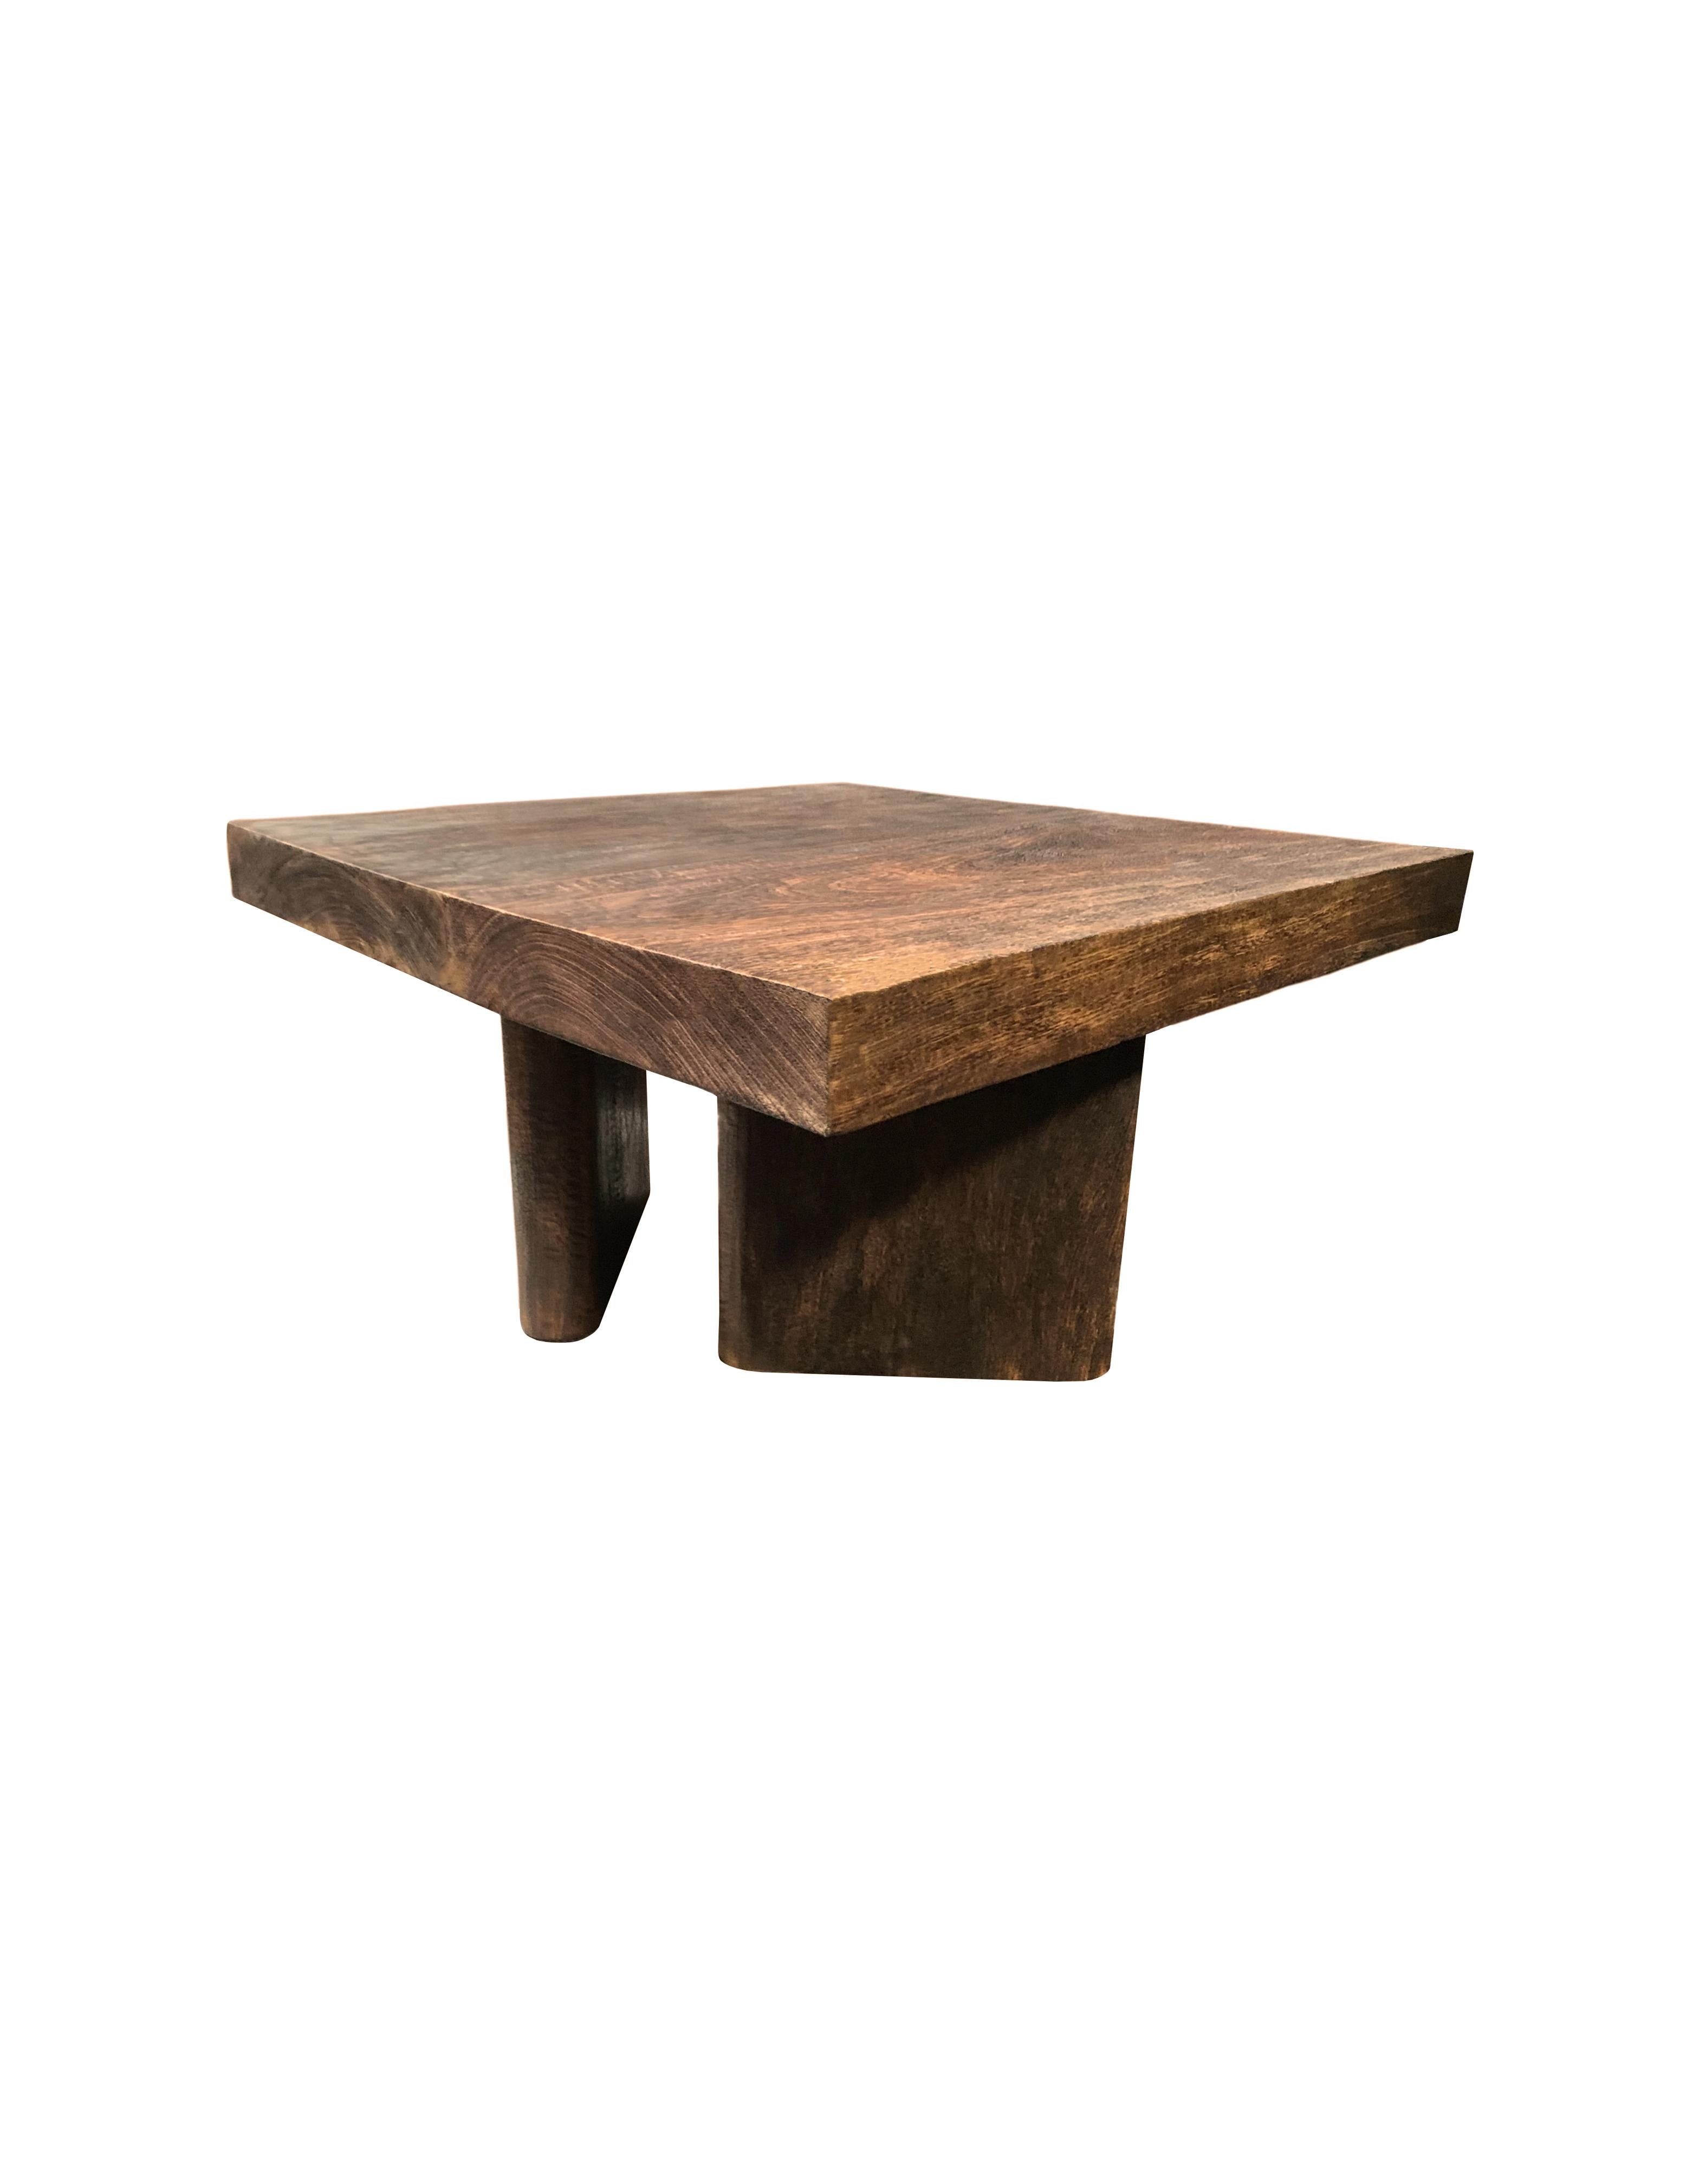 Hand-Carved Sculptural Mango Wood Table Espresso Finish Modern Organic For Sale